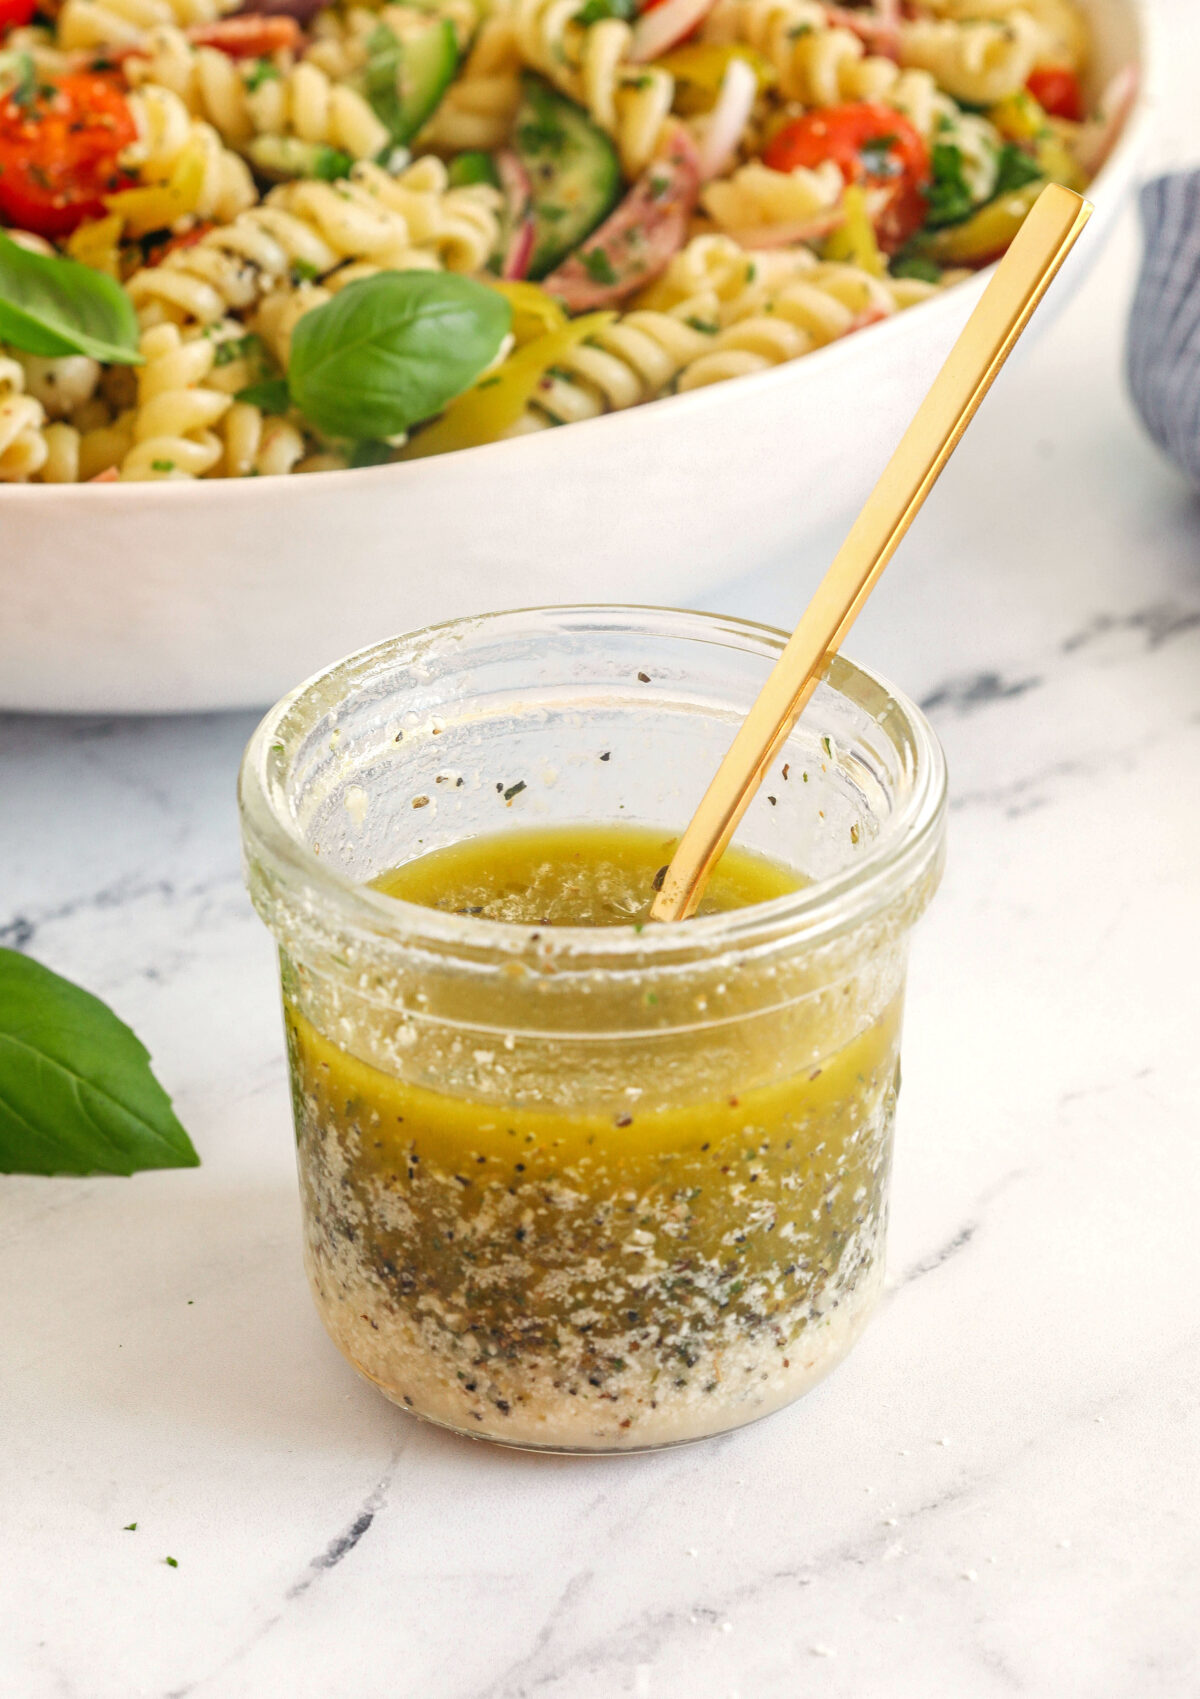 You'll love this zesty homemade Easy Italian Dressing made in just minutes with a few simple pantry ingredients!  Perfect for salads, veggies, marinades, and more!